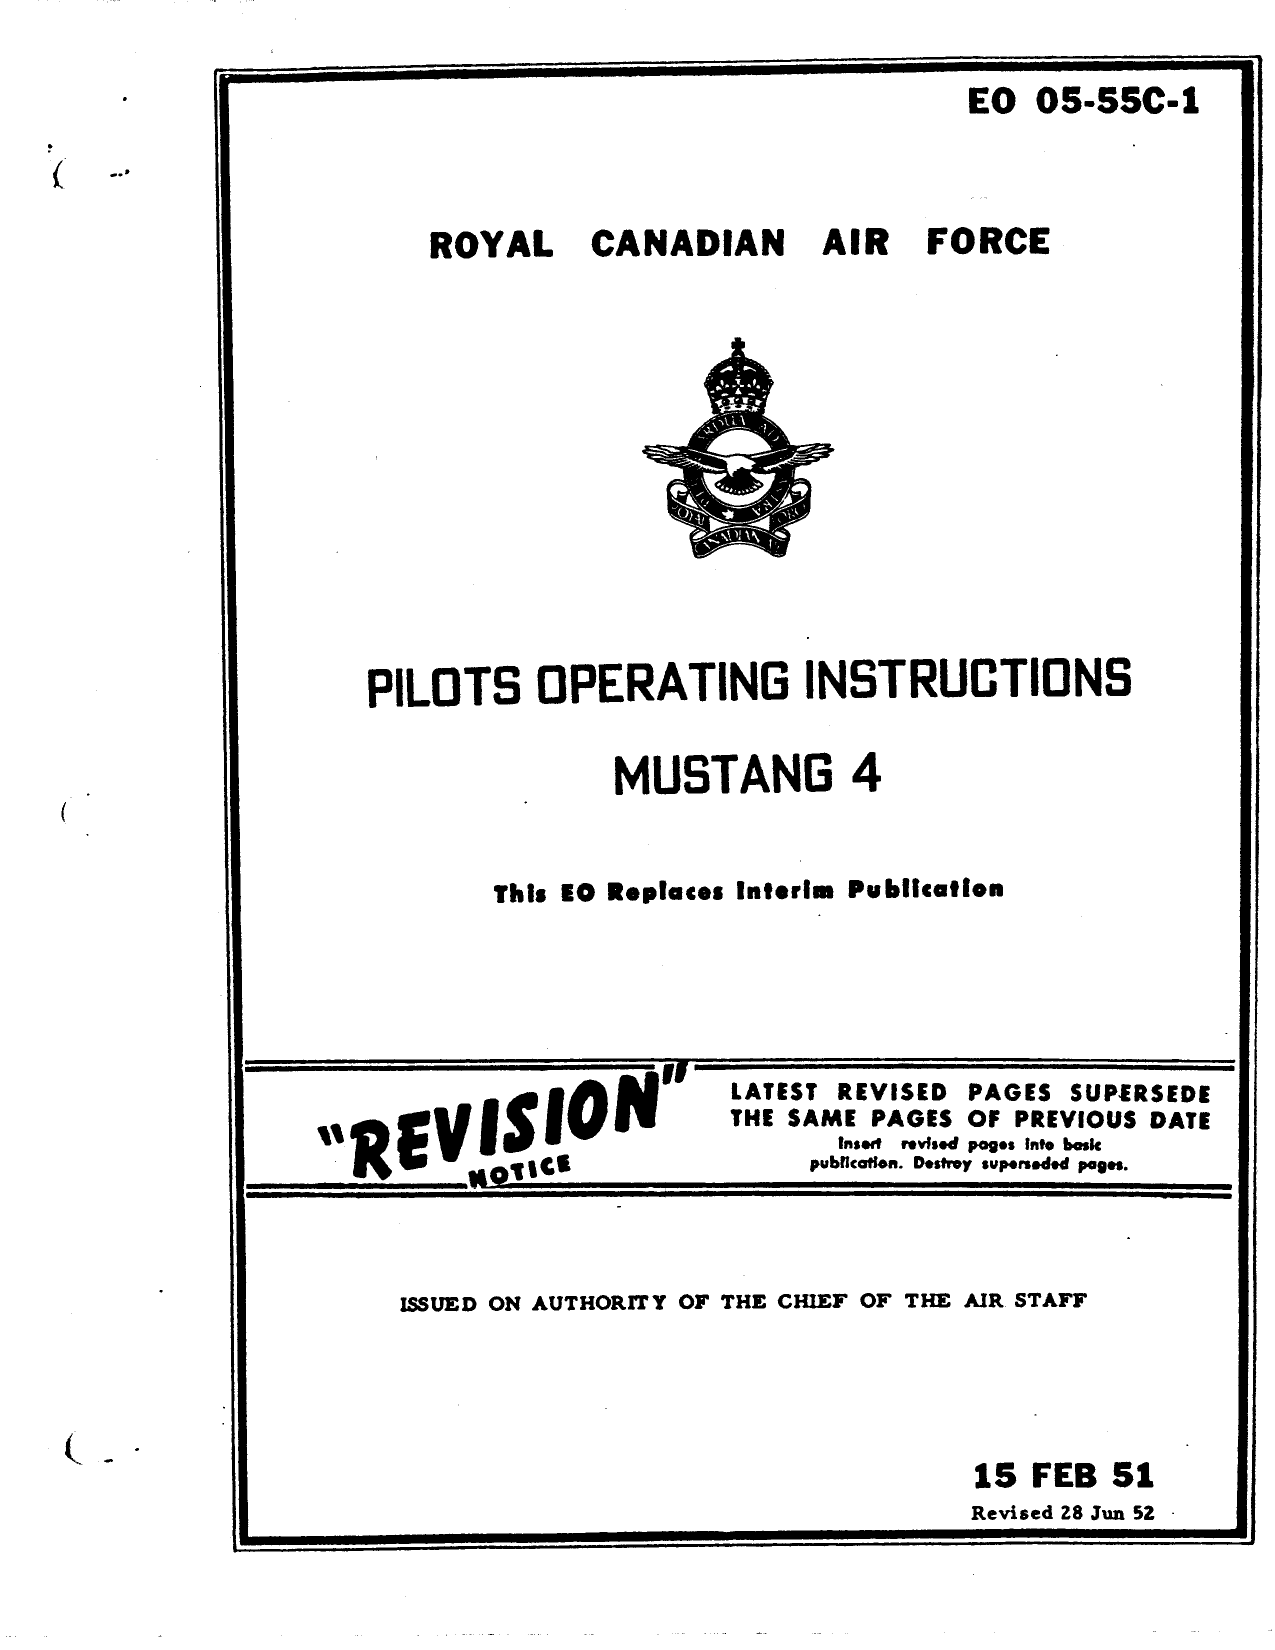 Sample page 1 from AirCorps Library document: Pilot's Operating Instructions for Mustang 4 (Royal Canadian Air Force)